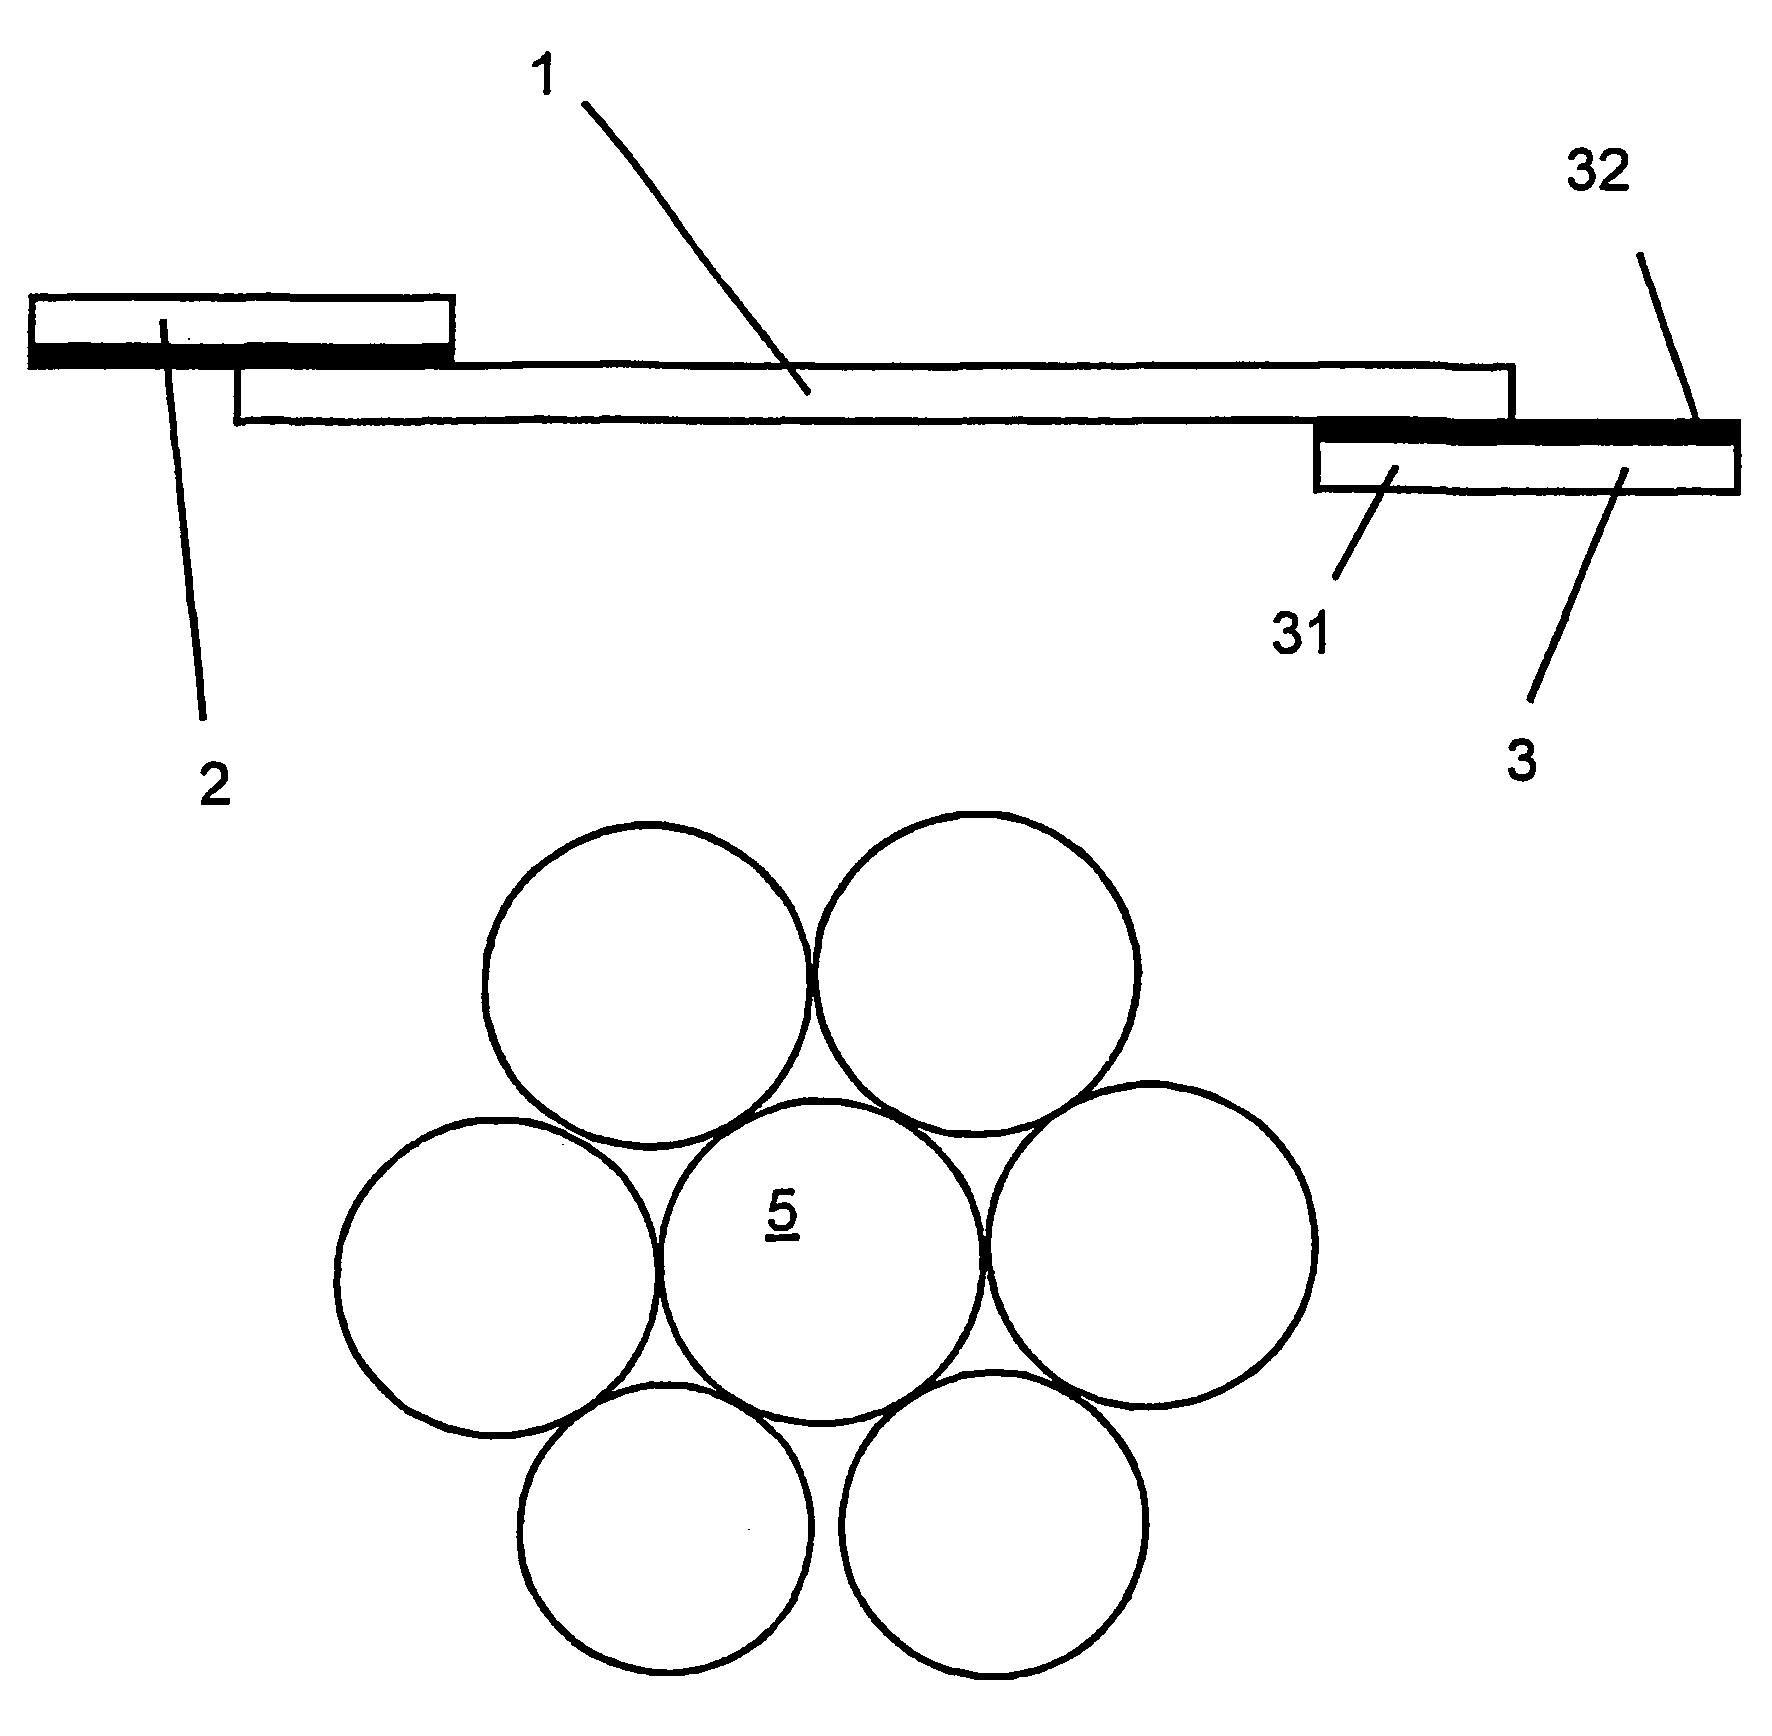 Method for providing longitudinally extended articles, such as cable assemblies, with a sheathing